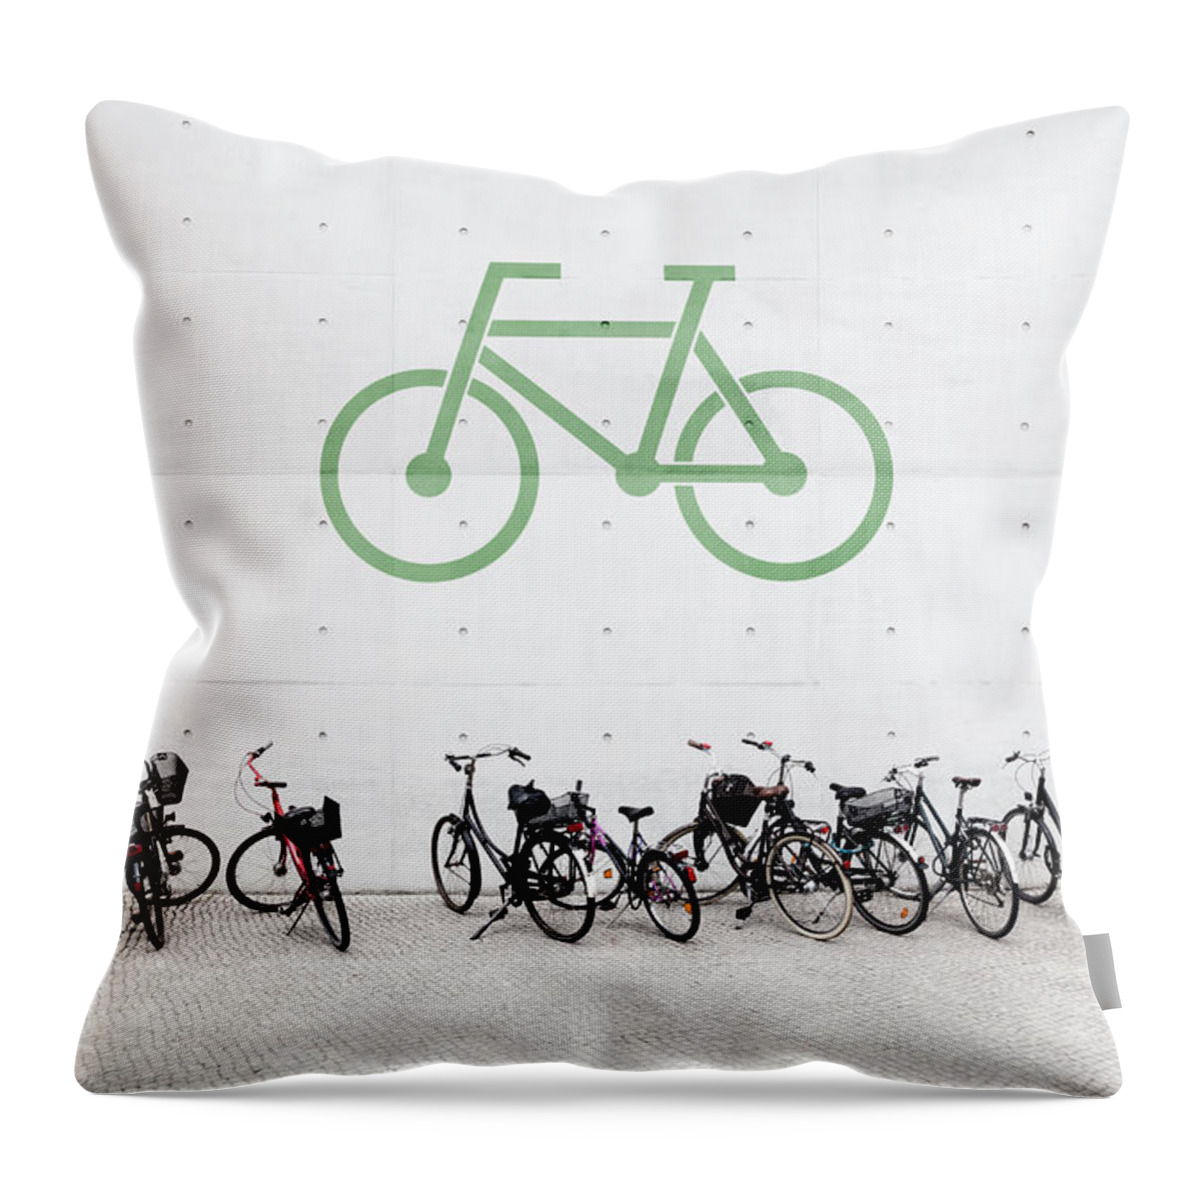 In A Row Throw Pillow featuring the photograph Bicycle Parking by Jorg Greuel